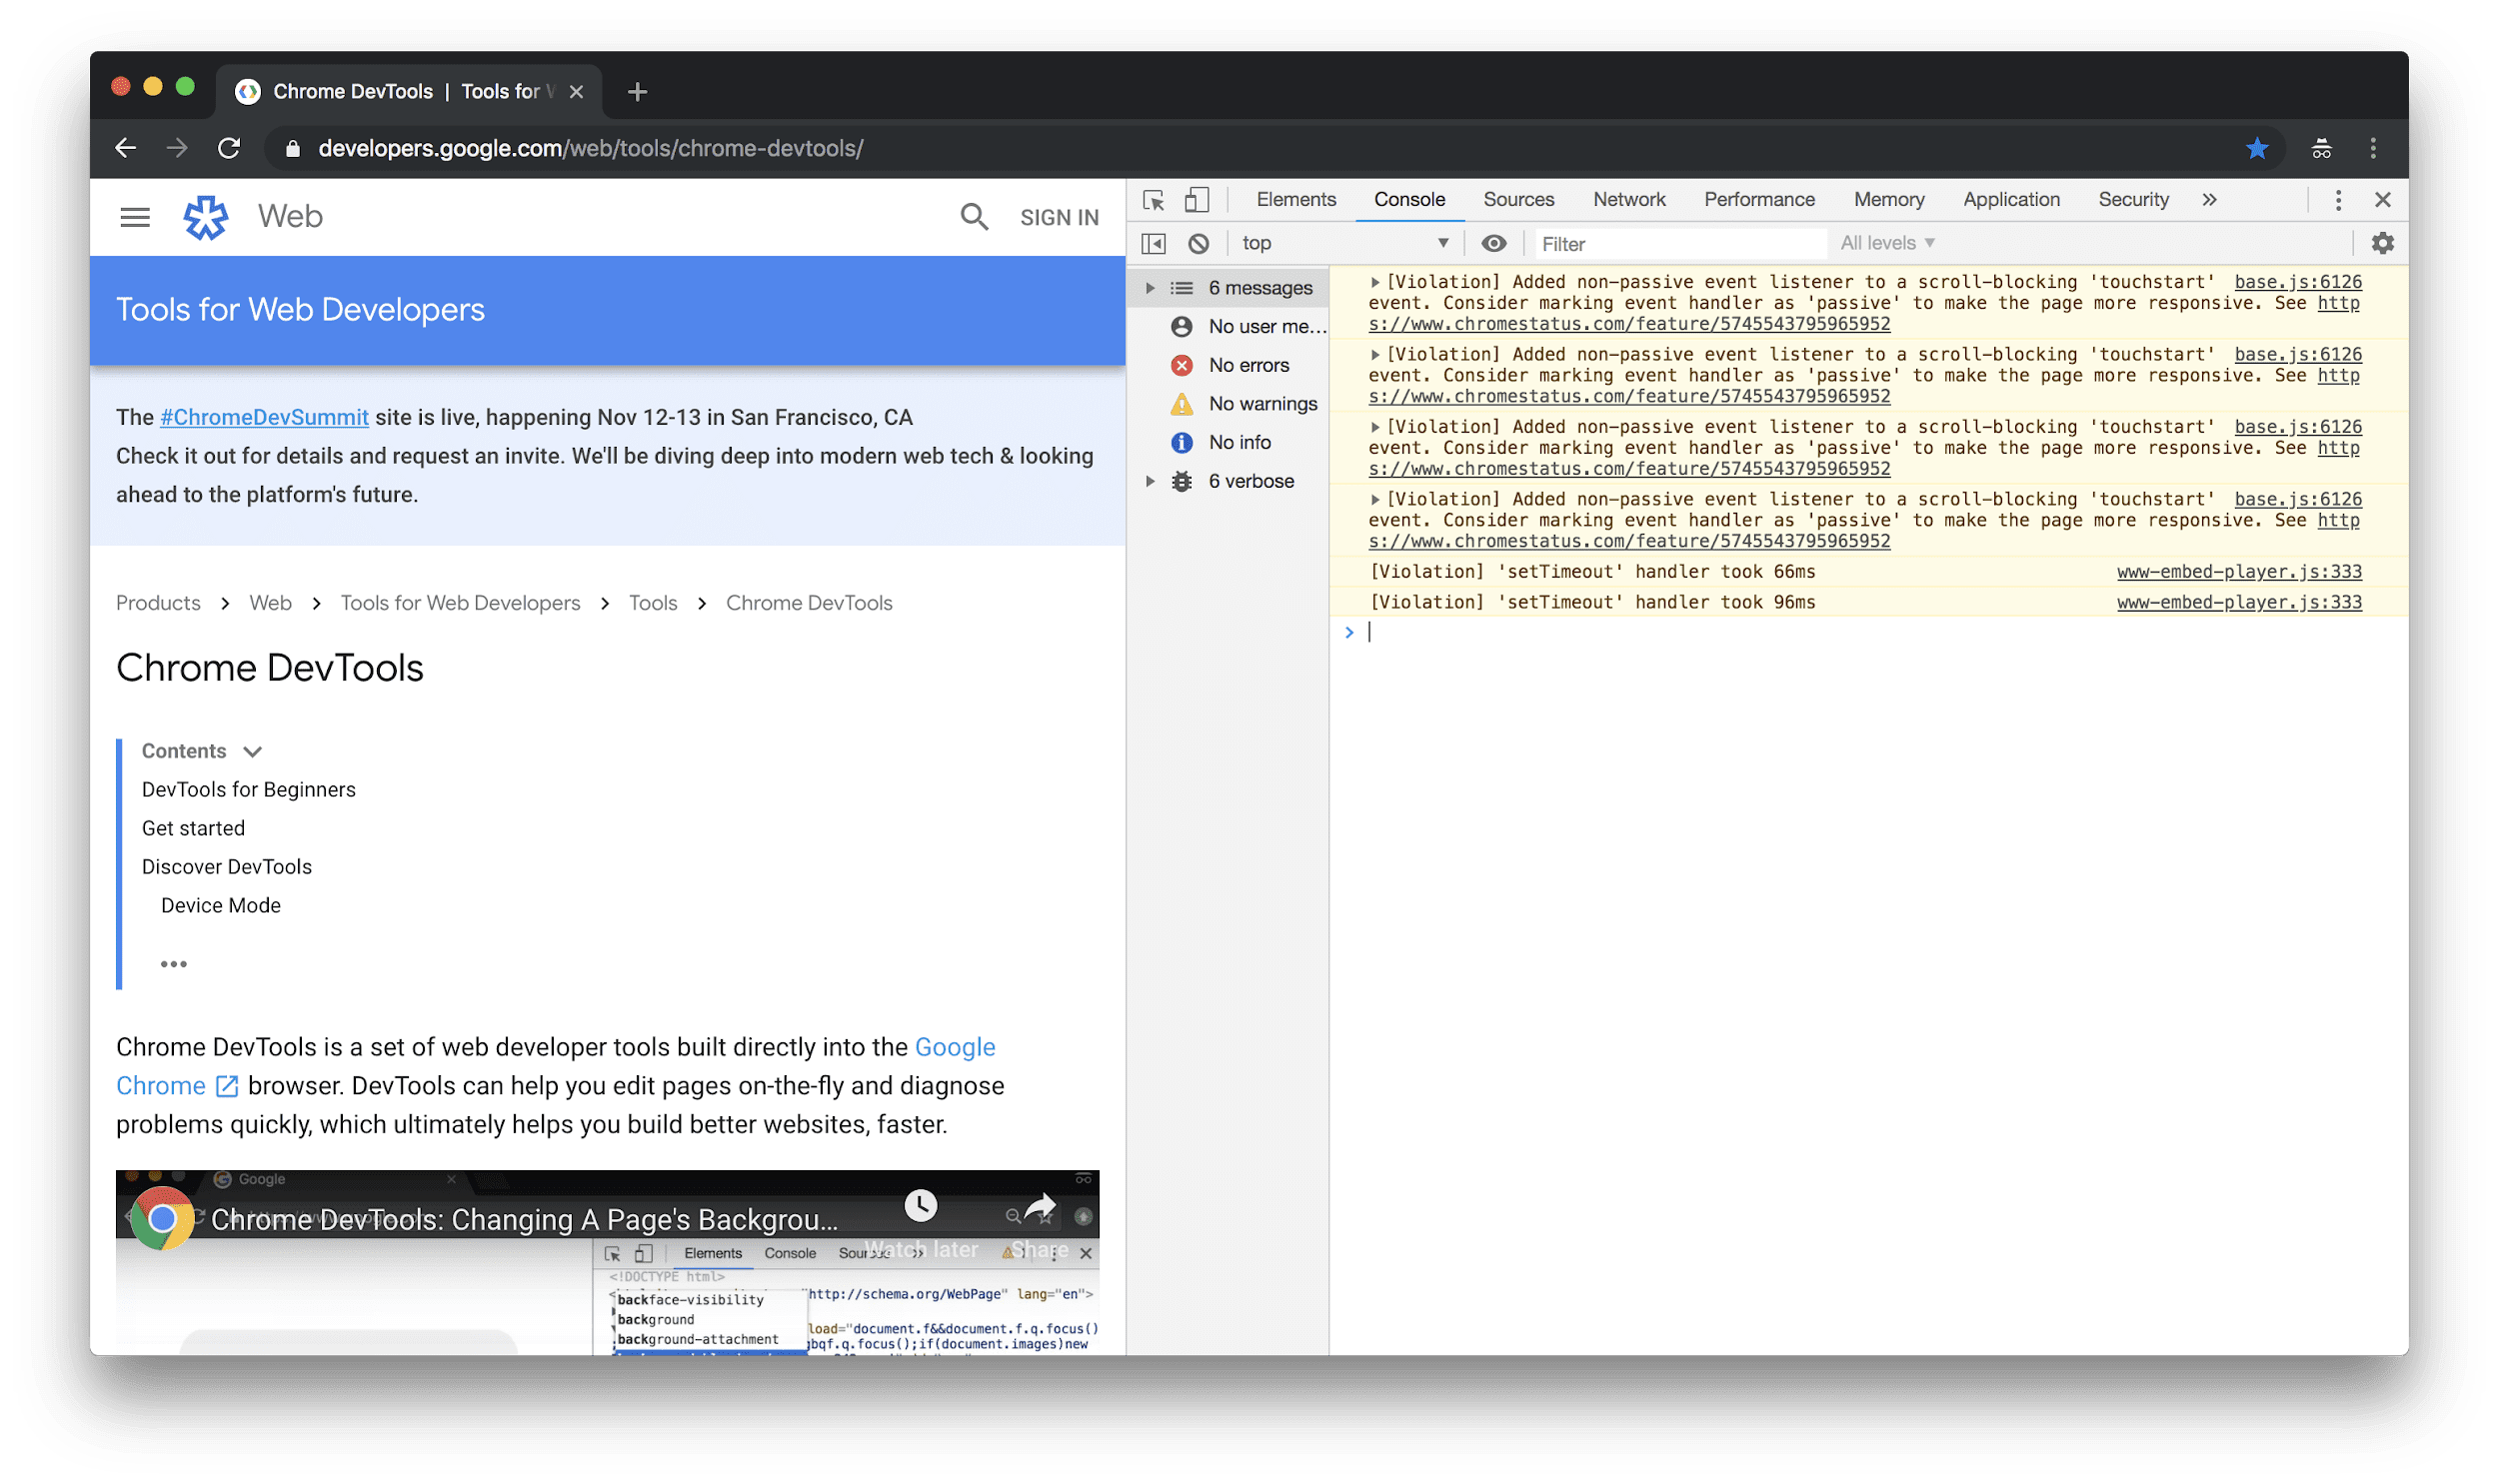 DevTools opened and docked to the right hand side of the screen.